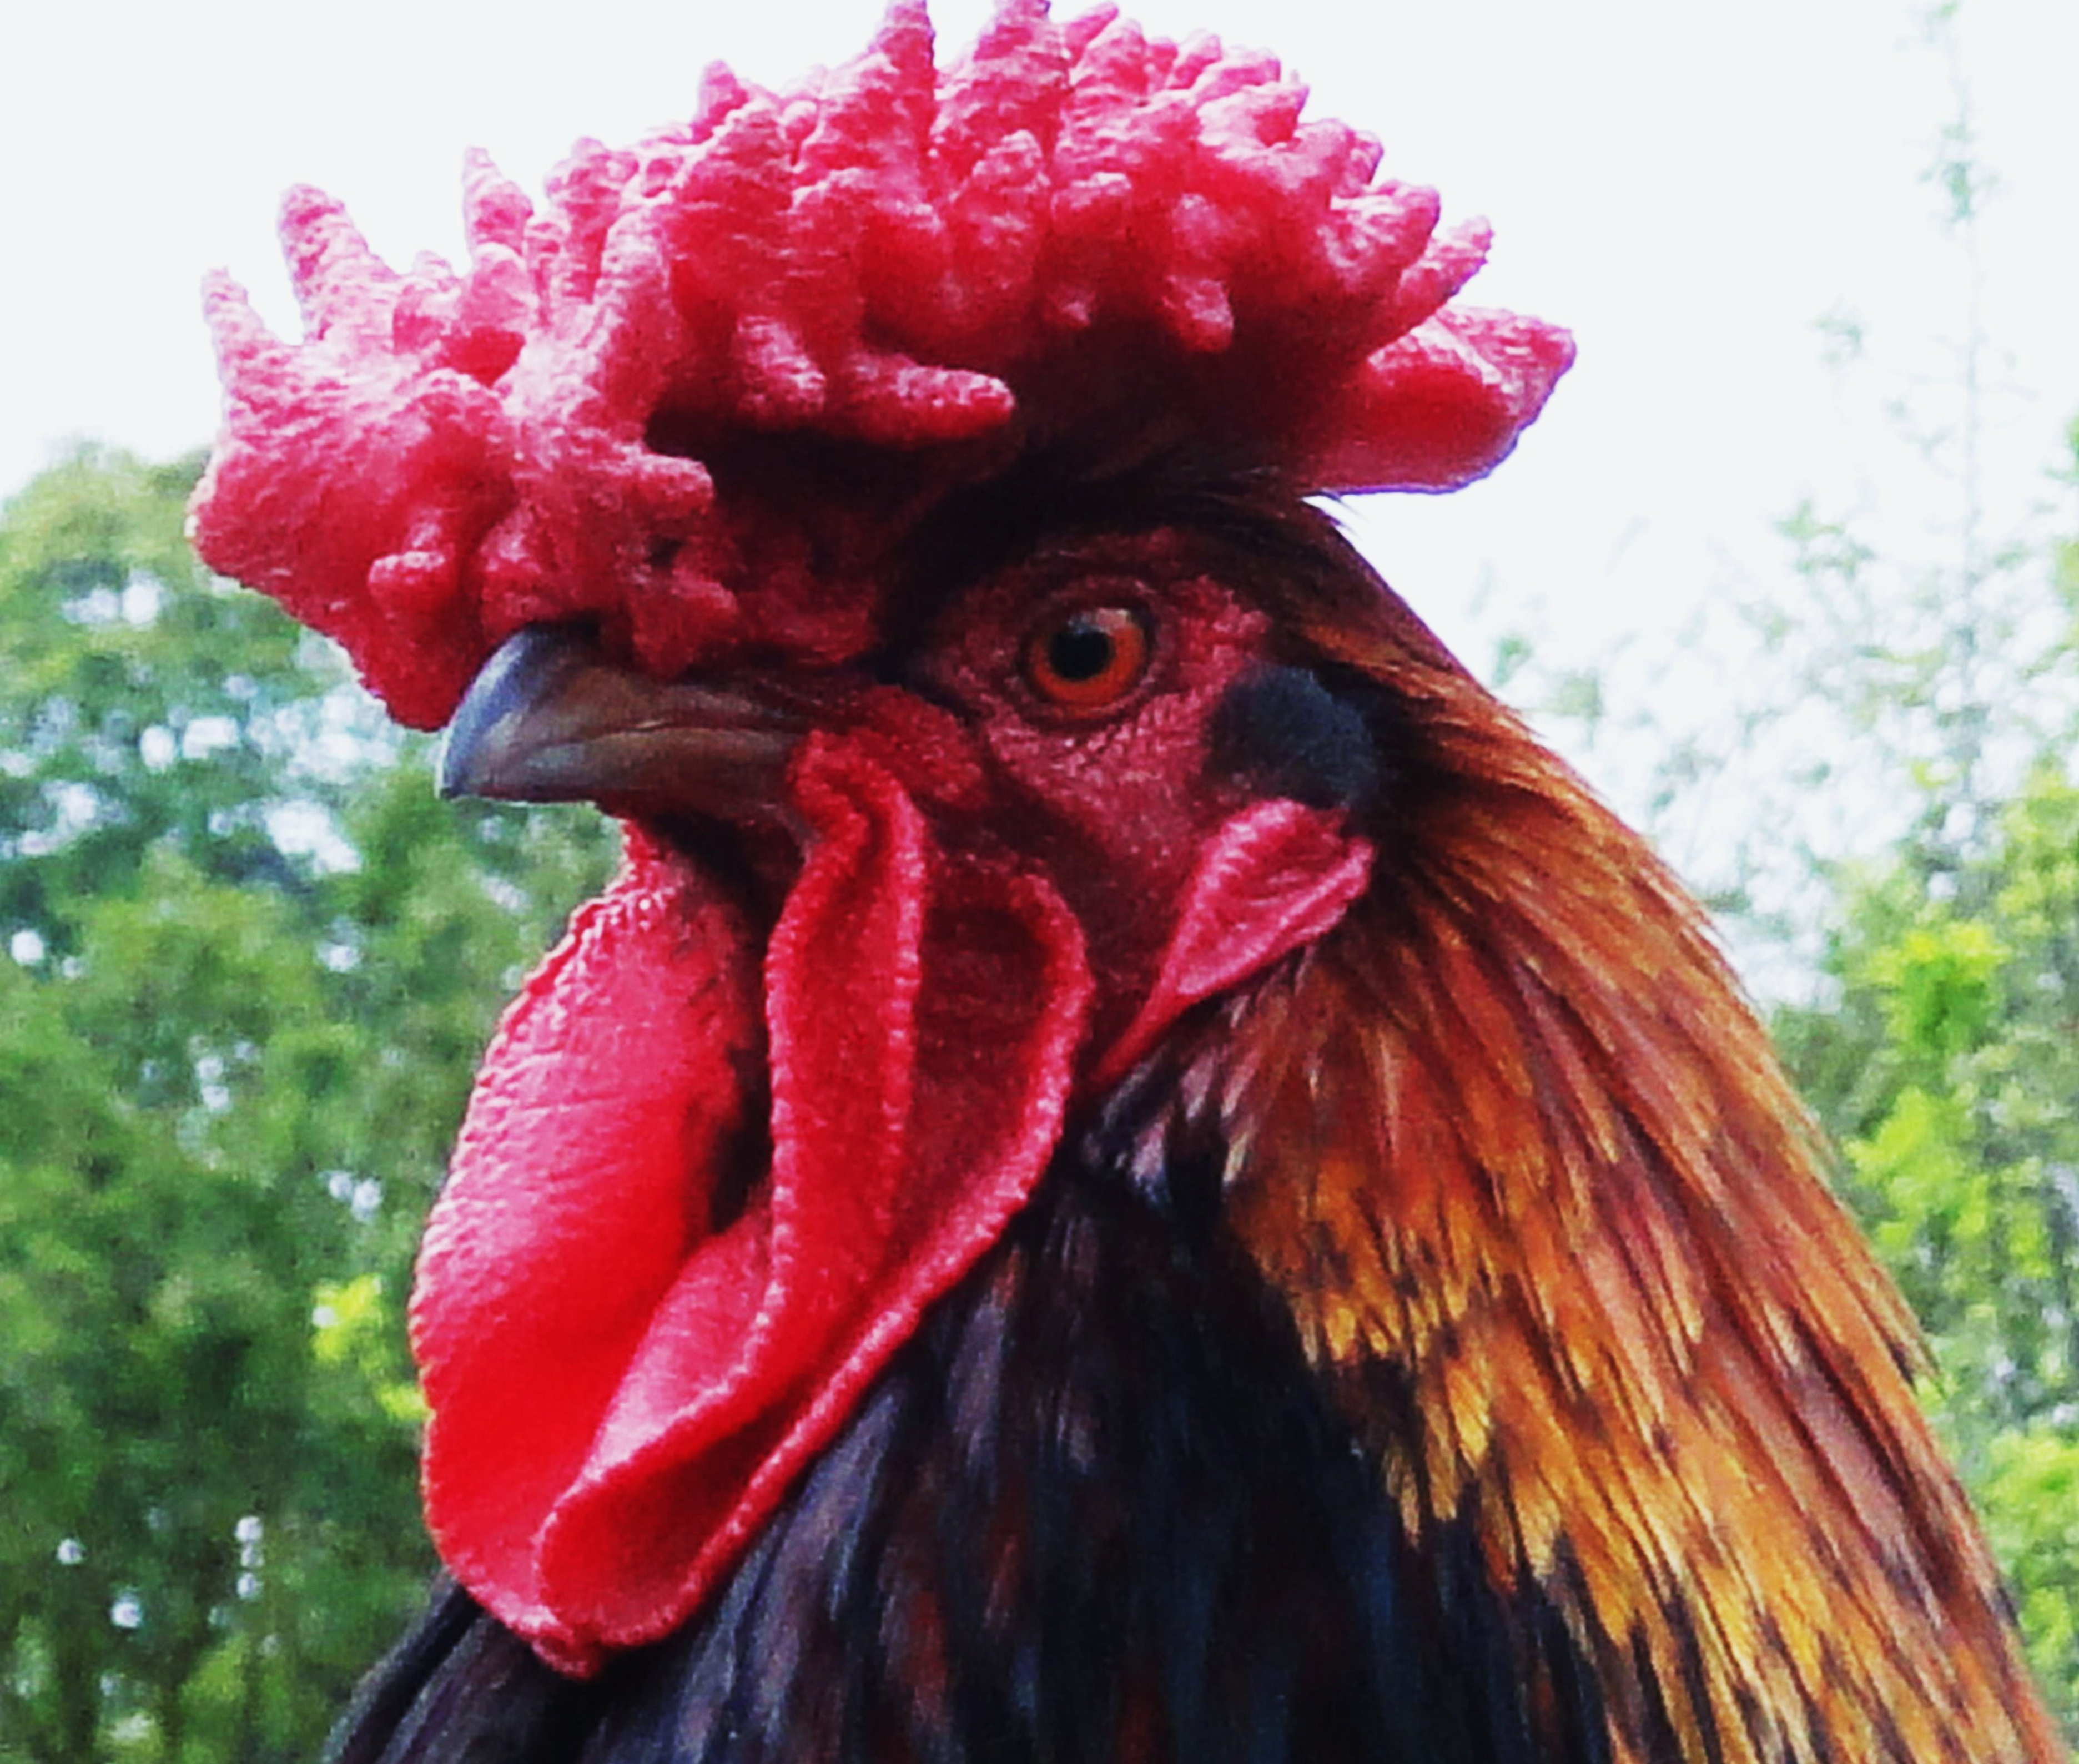 File:Big red rooster.jpg - Wikimedia Commons